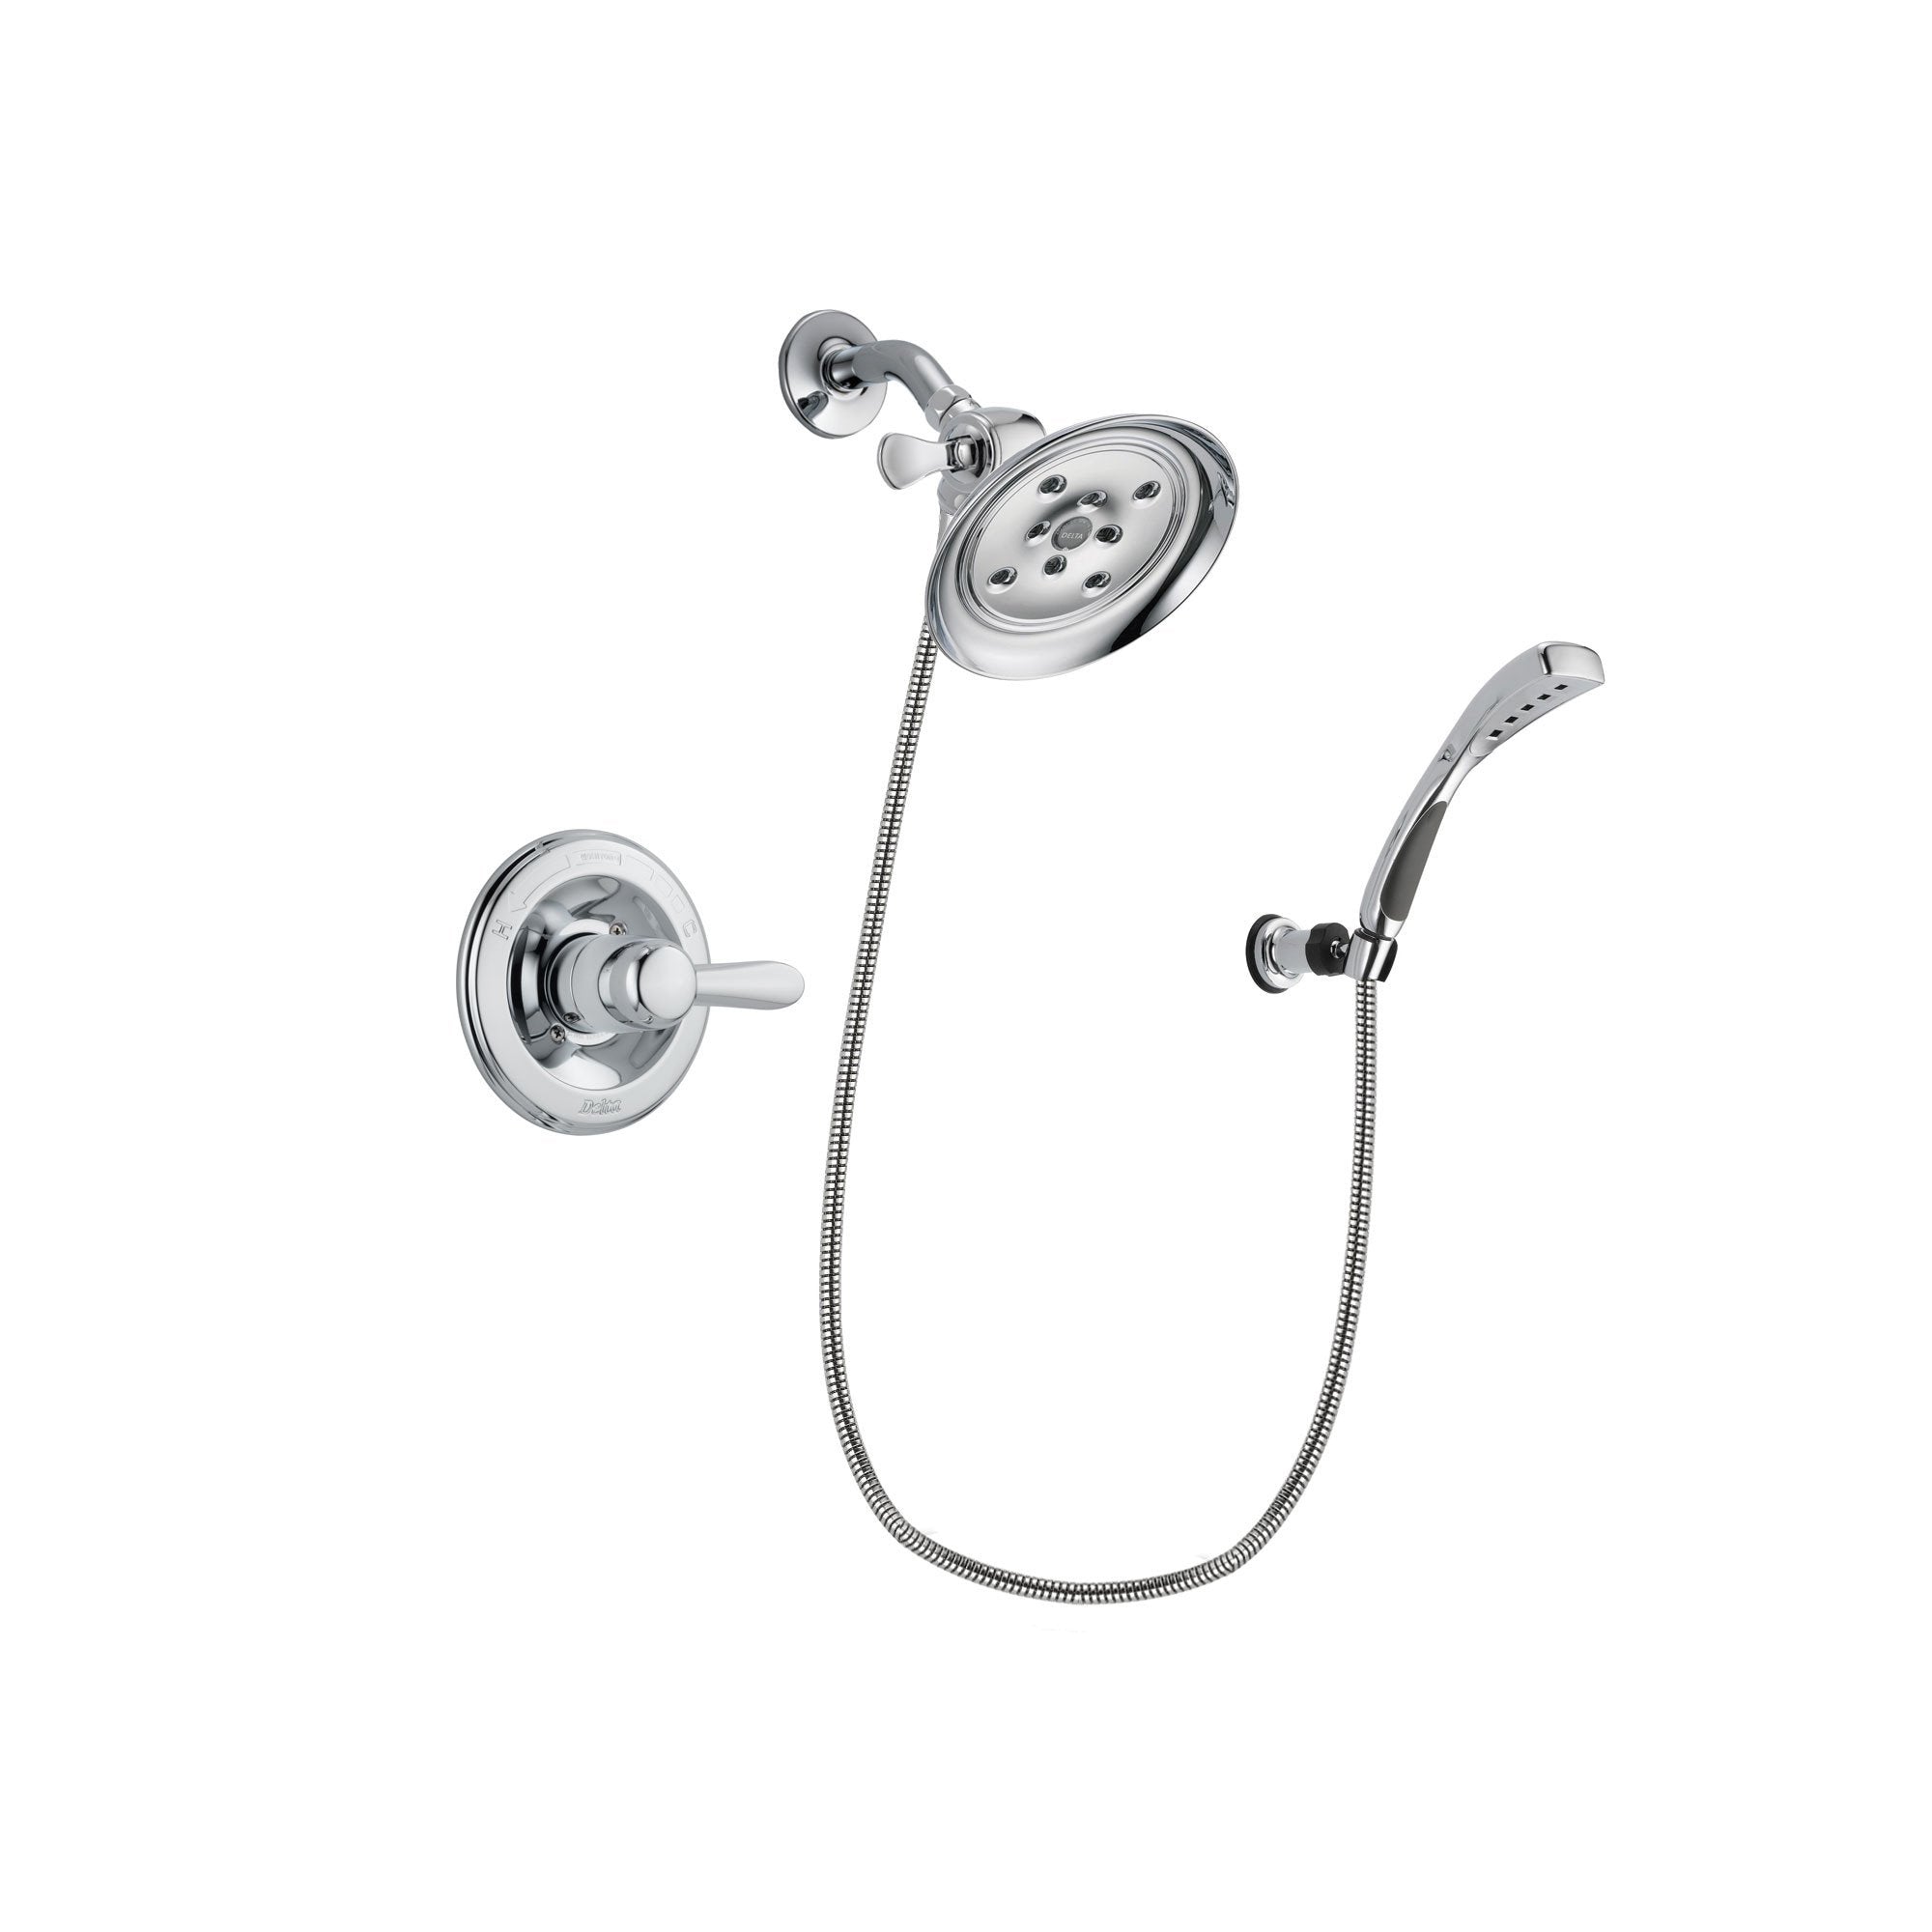 Delta Lahara Chrome Finish Shower Faucet System Package with Large Rain Showerhead and Wall-Mount Bracket with Handheld Shower Spray Includes Rough-in Valve DSP1048V